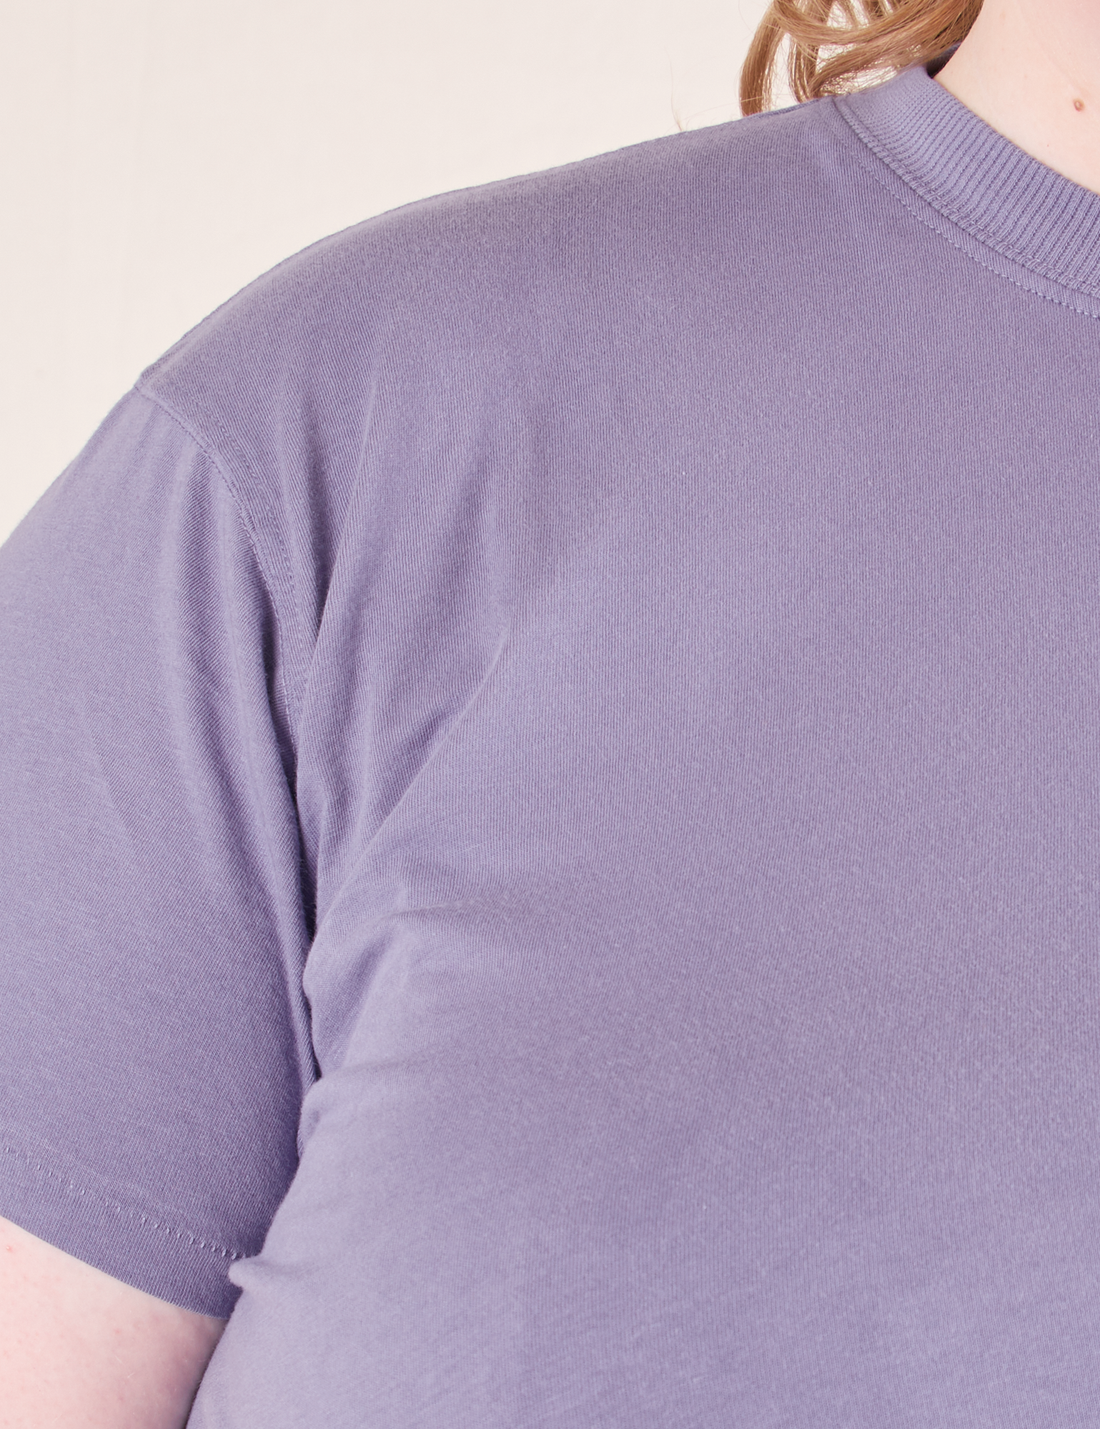 The Organic Vintage Tee in Faded Grape front close up on Catie